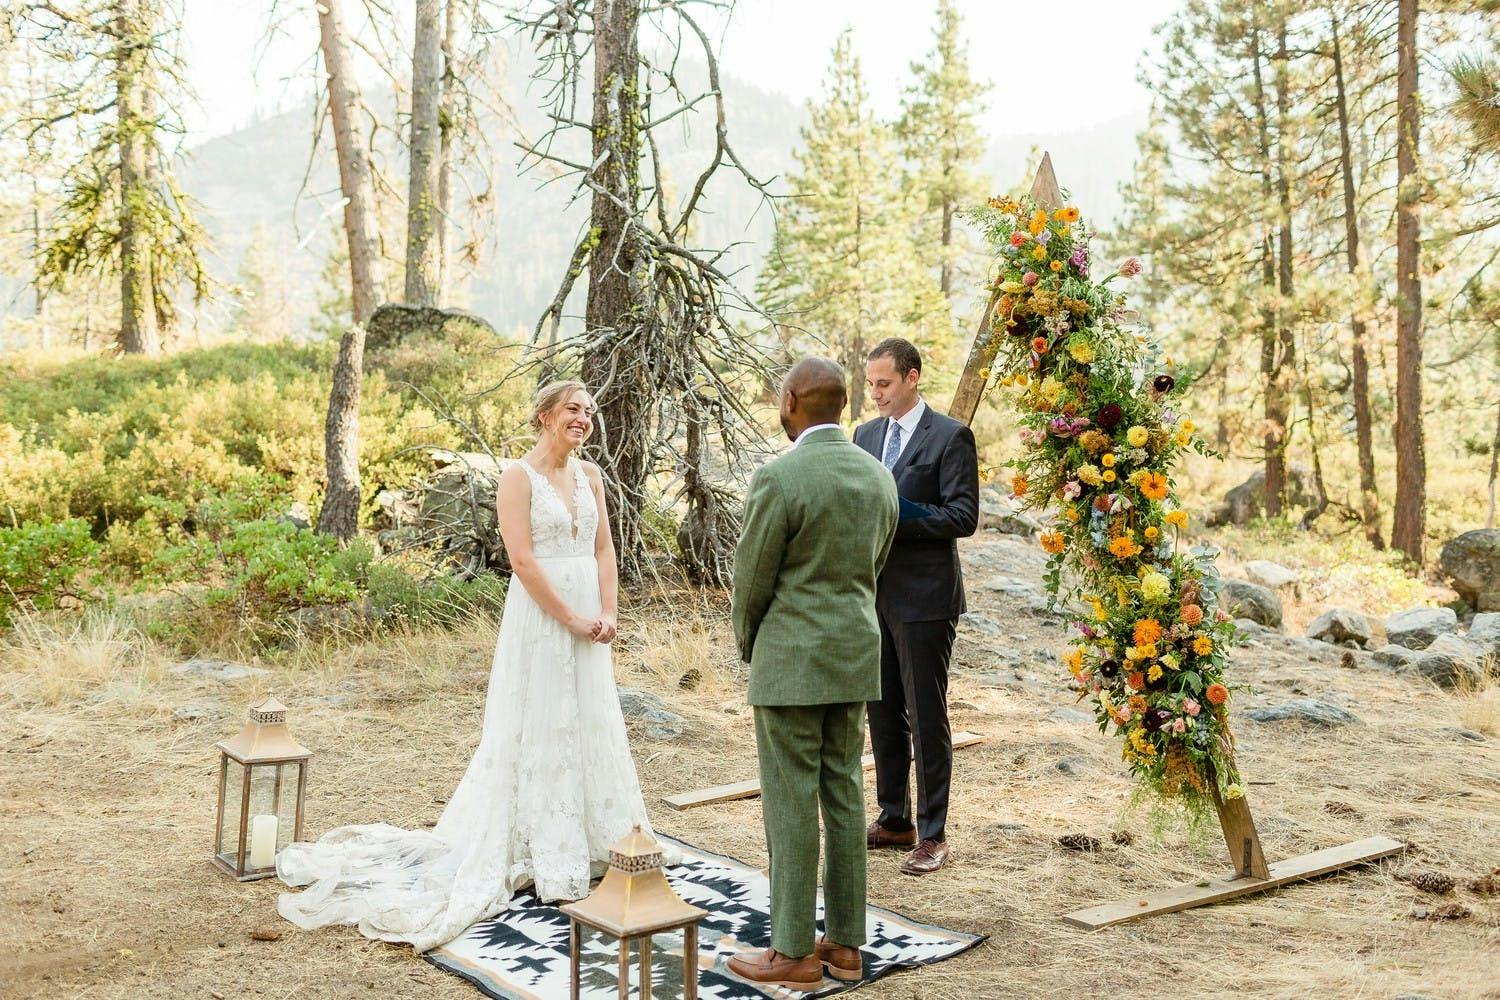 intimate micro wedding ceremony in woods with triangle arch with one side covered in flowers | PartySlate